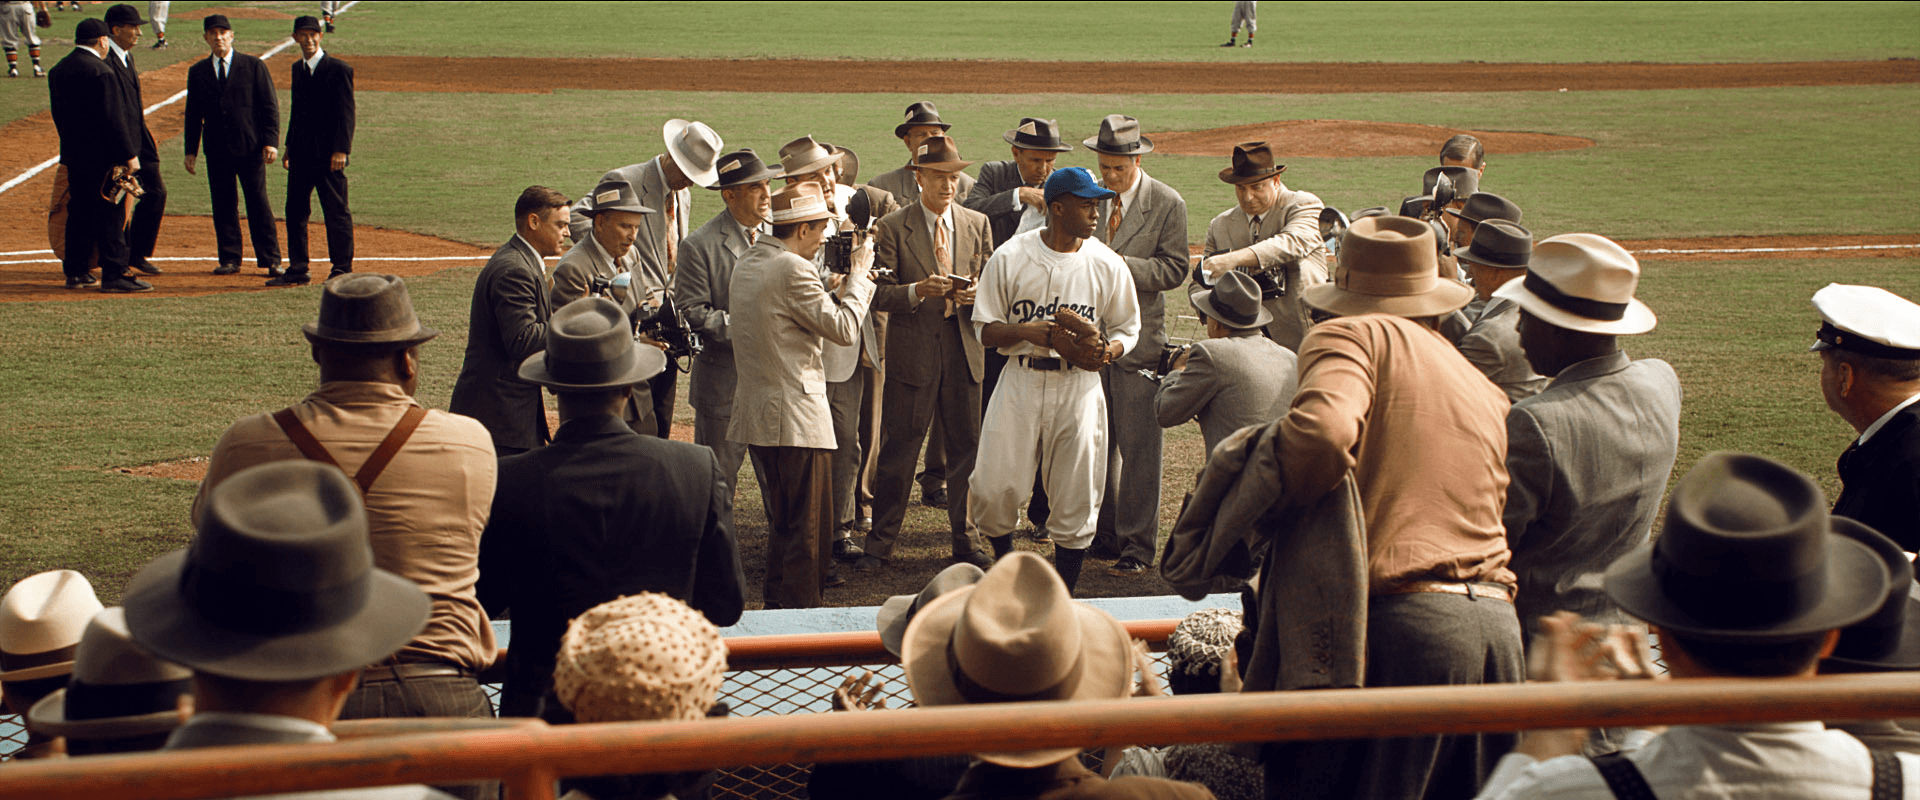 The true story of Jackie Robinson in one of the great baseball movies.